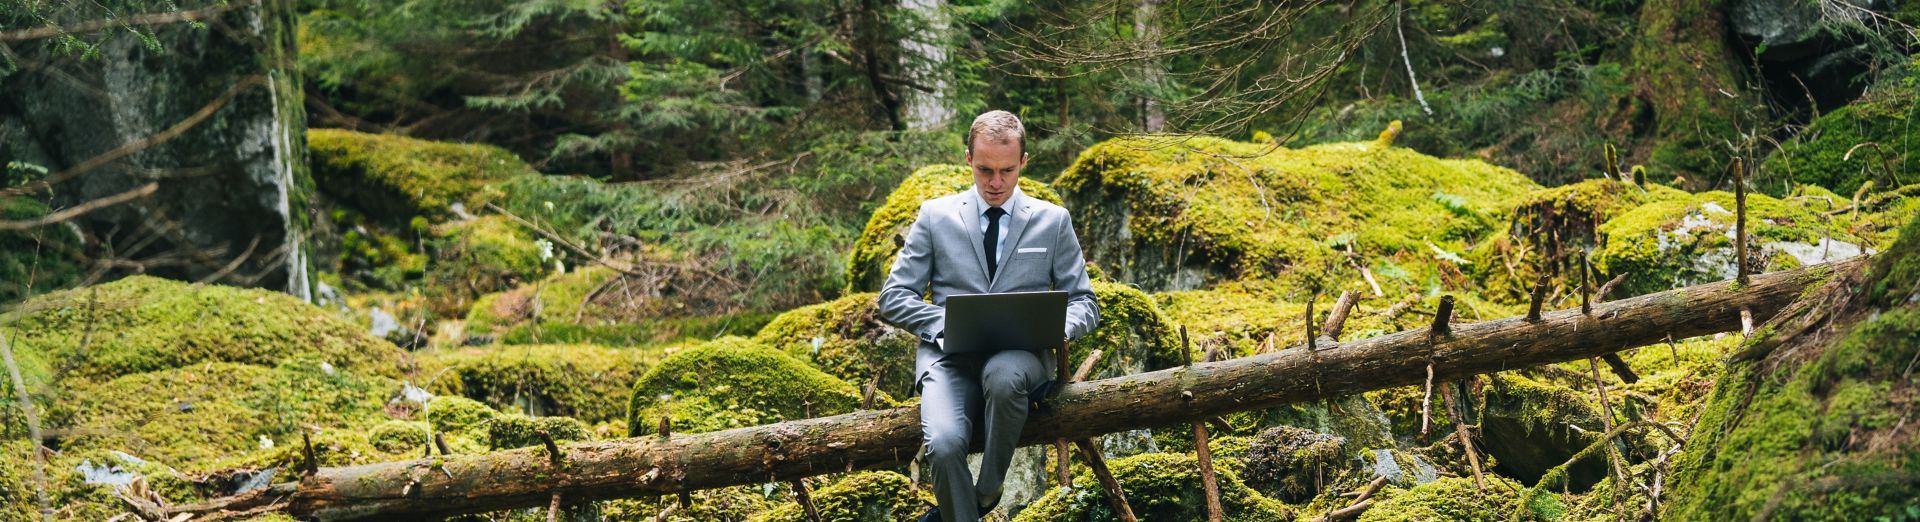 Man using laptop in the middle of a forest